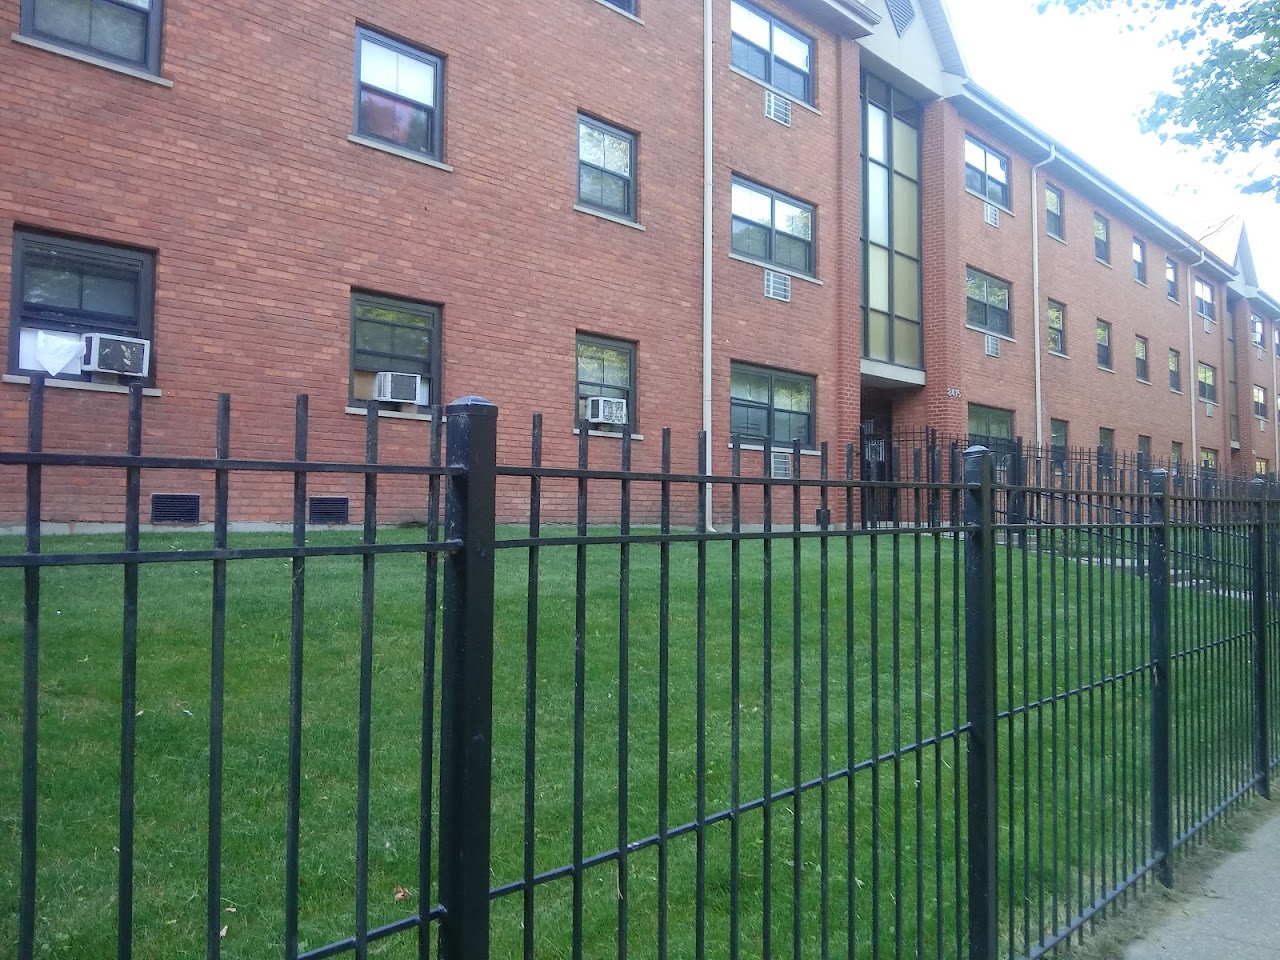 Photo of STONE TERRACE. Affordable housing located at 8440 S PARNELL AVE CHICAGO, IL 60620